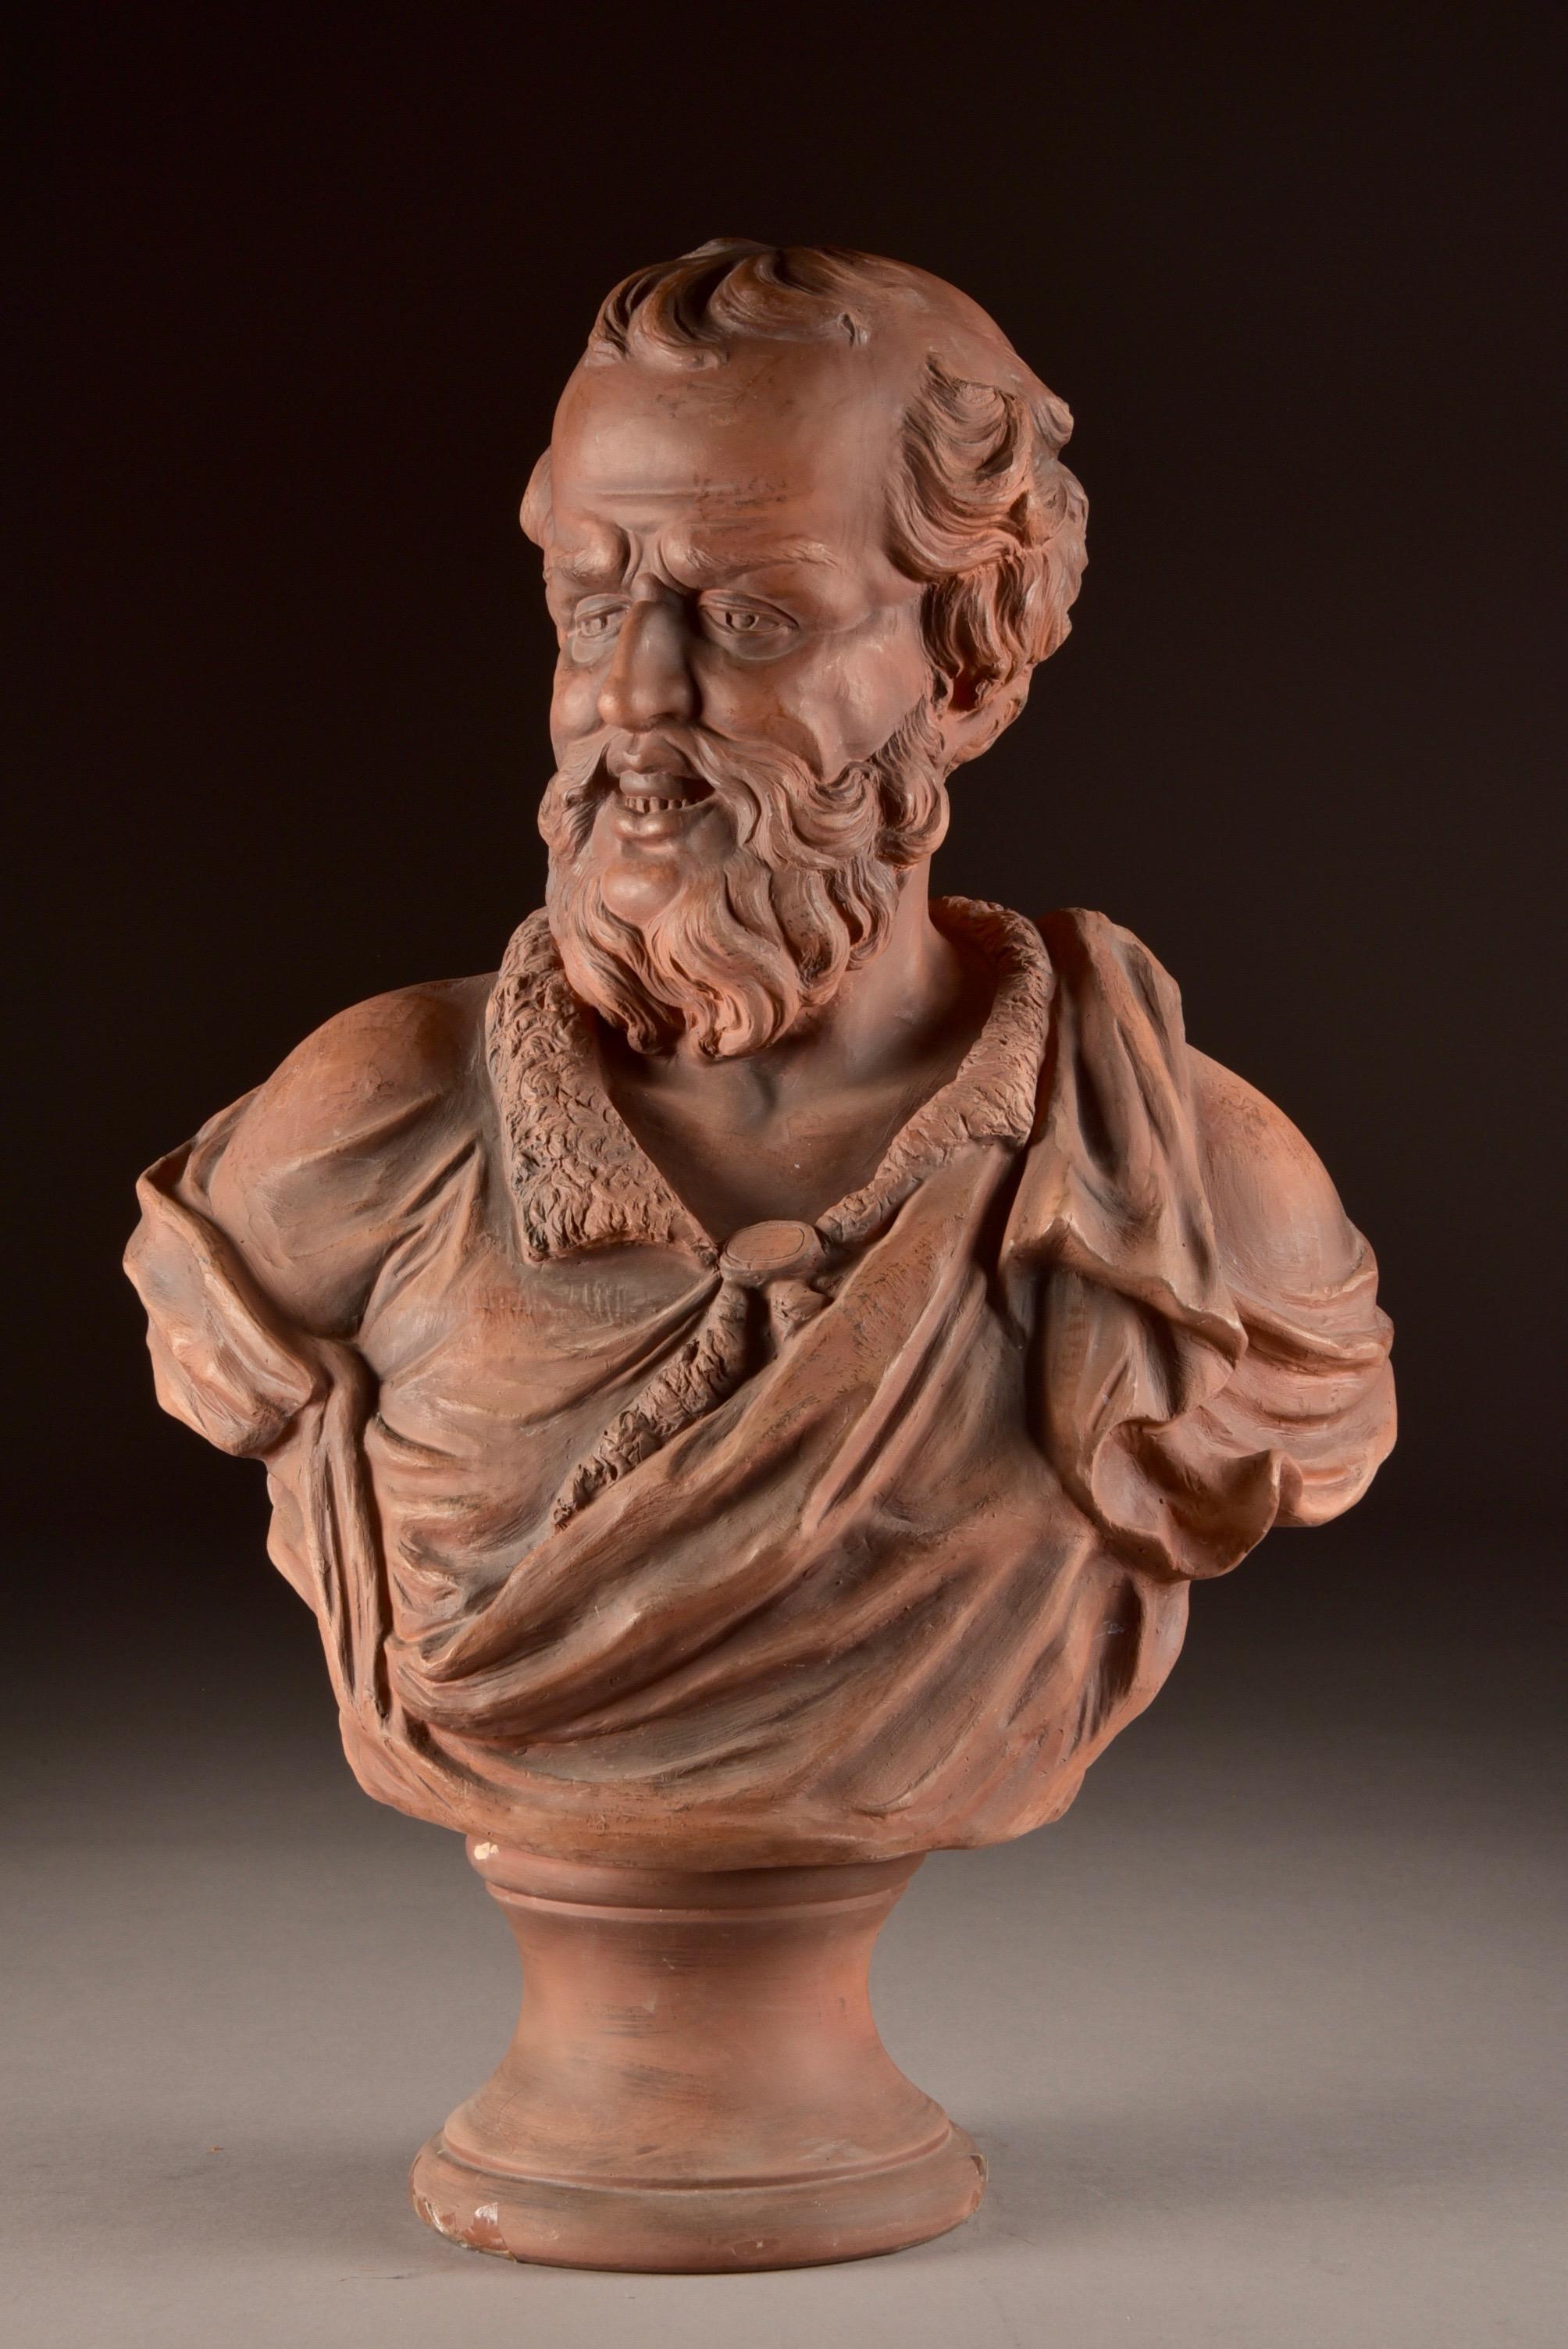 Goldscheider porcelain manufactory and Majolica factory, sculpture, large bust of a man with a beard, 53 cm (1), terracotta, circa 1900
Vienna, Austria

Dimensions: 53 × 36 × 23 cm, weight: 5.1 kg.
  